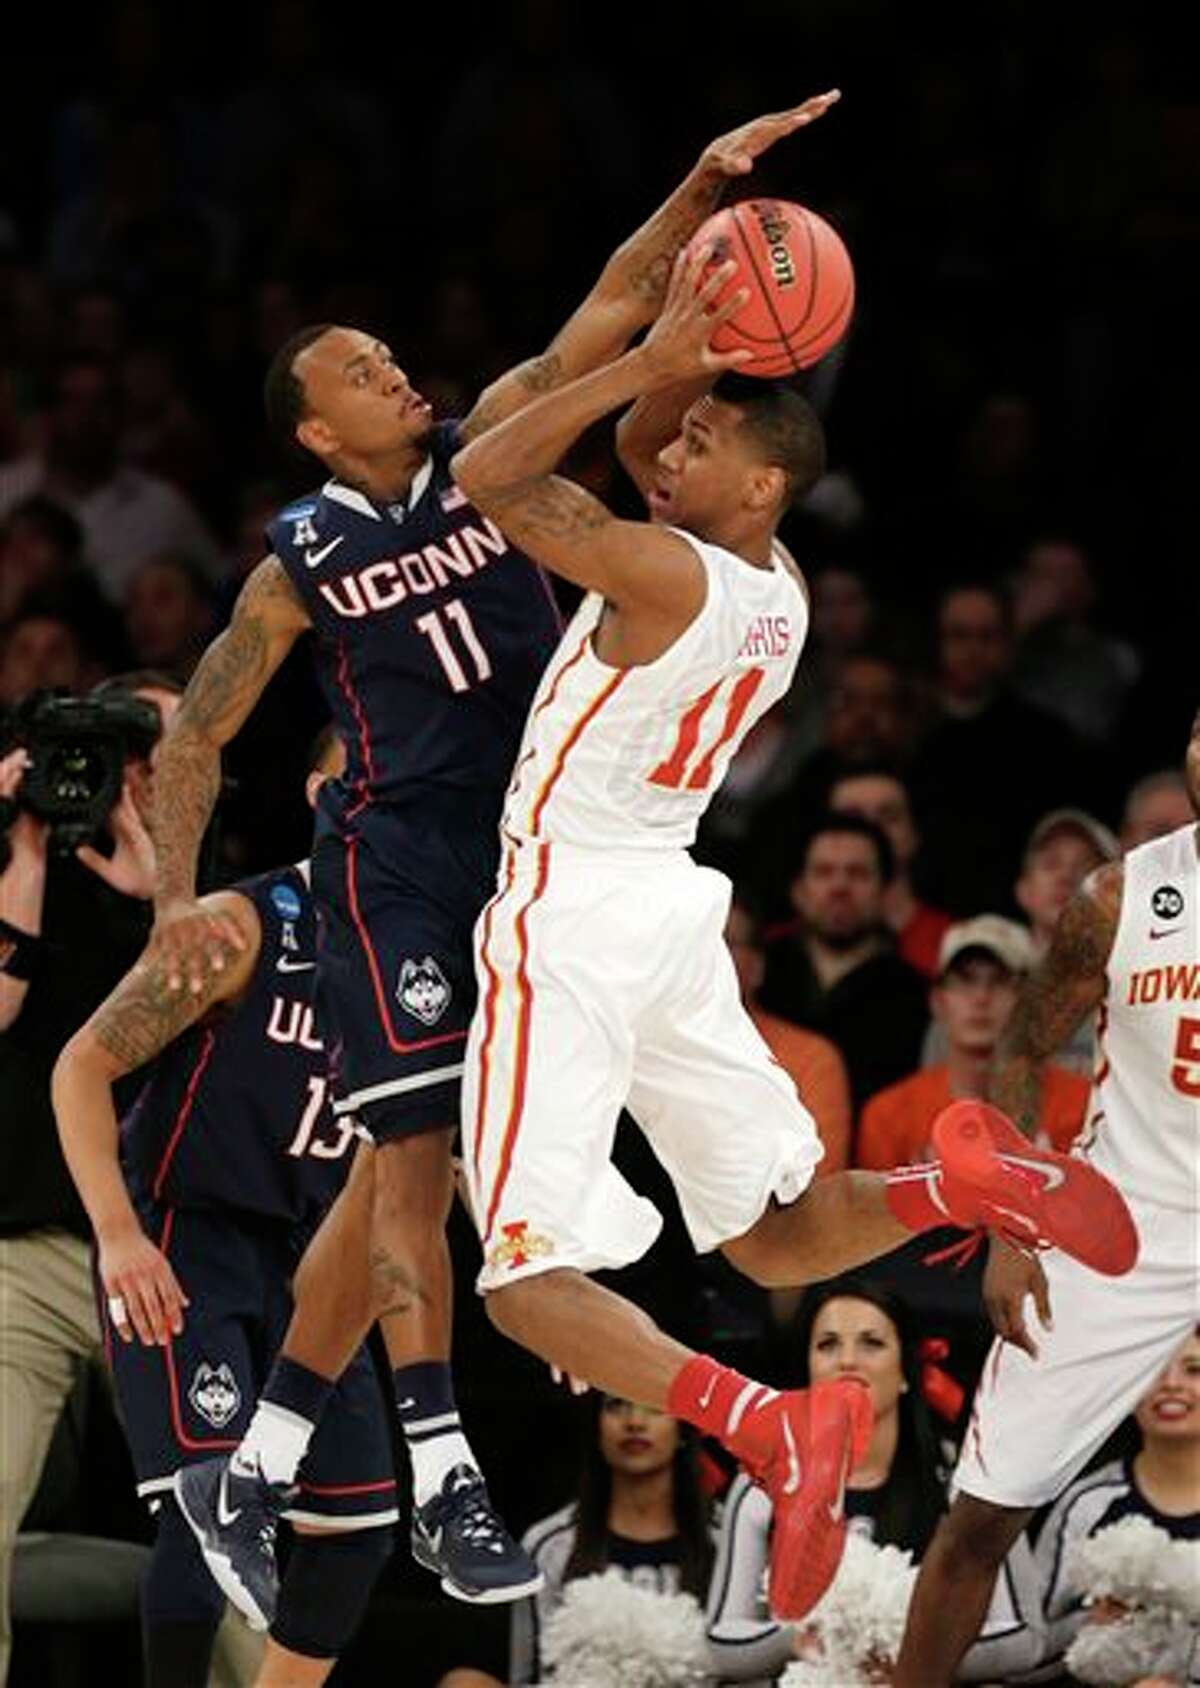 Connecticut's Ryan Boatright, left, reaches to block a pass by Iowa State's Monte Morris during the first half in a regional semifinal of the NCAA men's college basketball tournament Friday, March 28, 2014, in New York. (AP Photo/Seth Wenig)